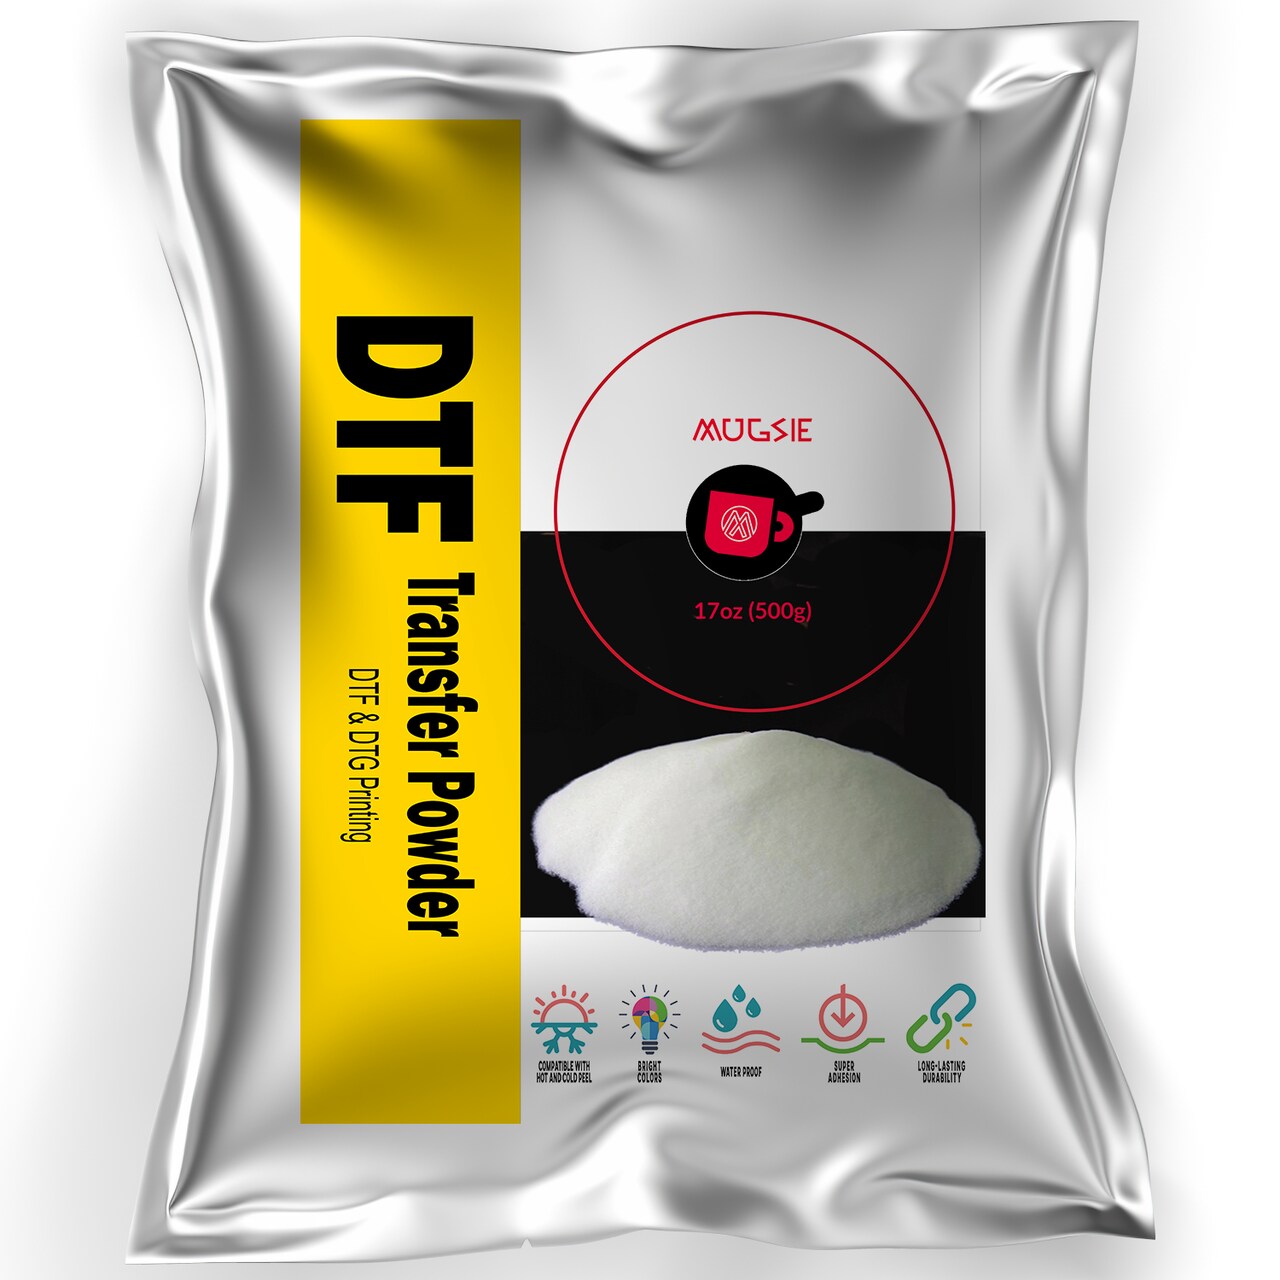 DTF Transfer Powder - 500g / 17.6oz White Hot Melt Adhesive for  Sublimation, Compatible with DTF and DTG Printers, Versatile Powder for All  Fabrics Including Jeans and Cotton T-Shirts